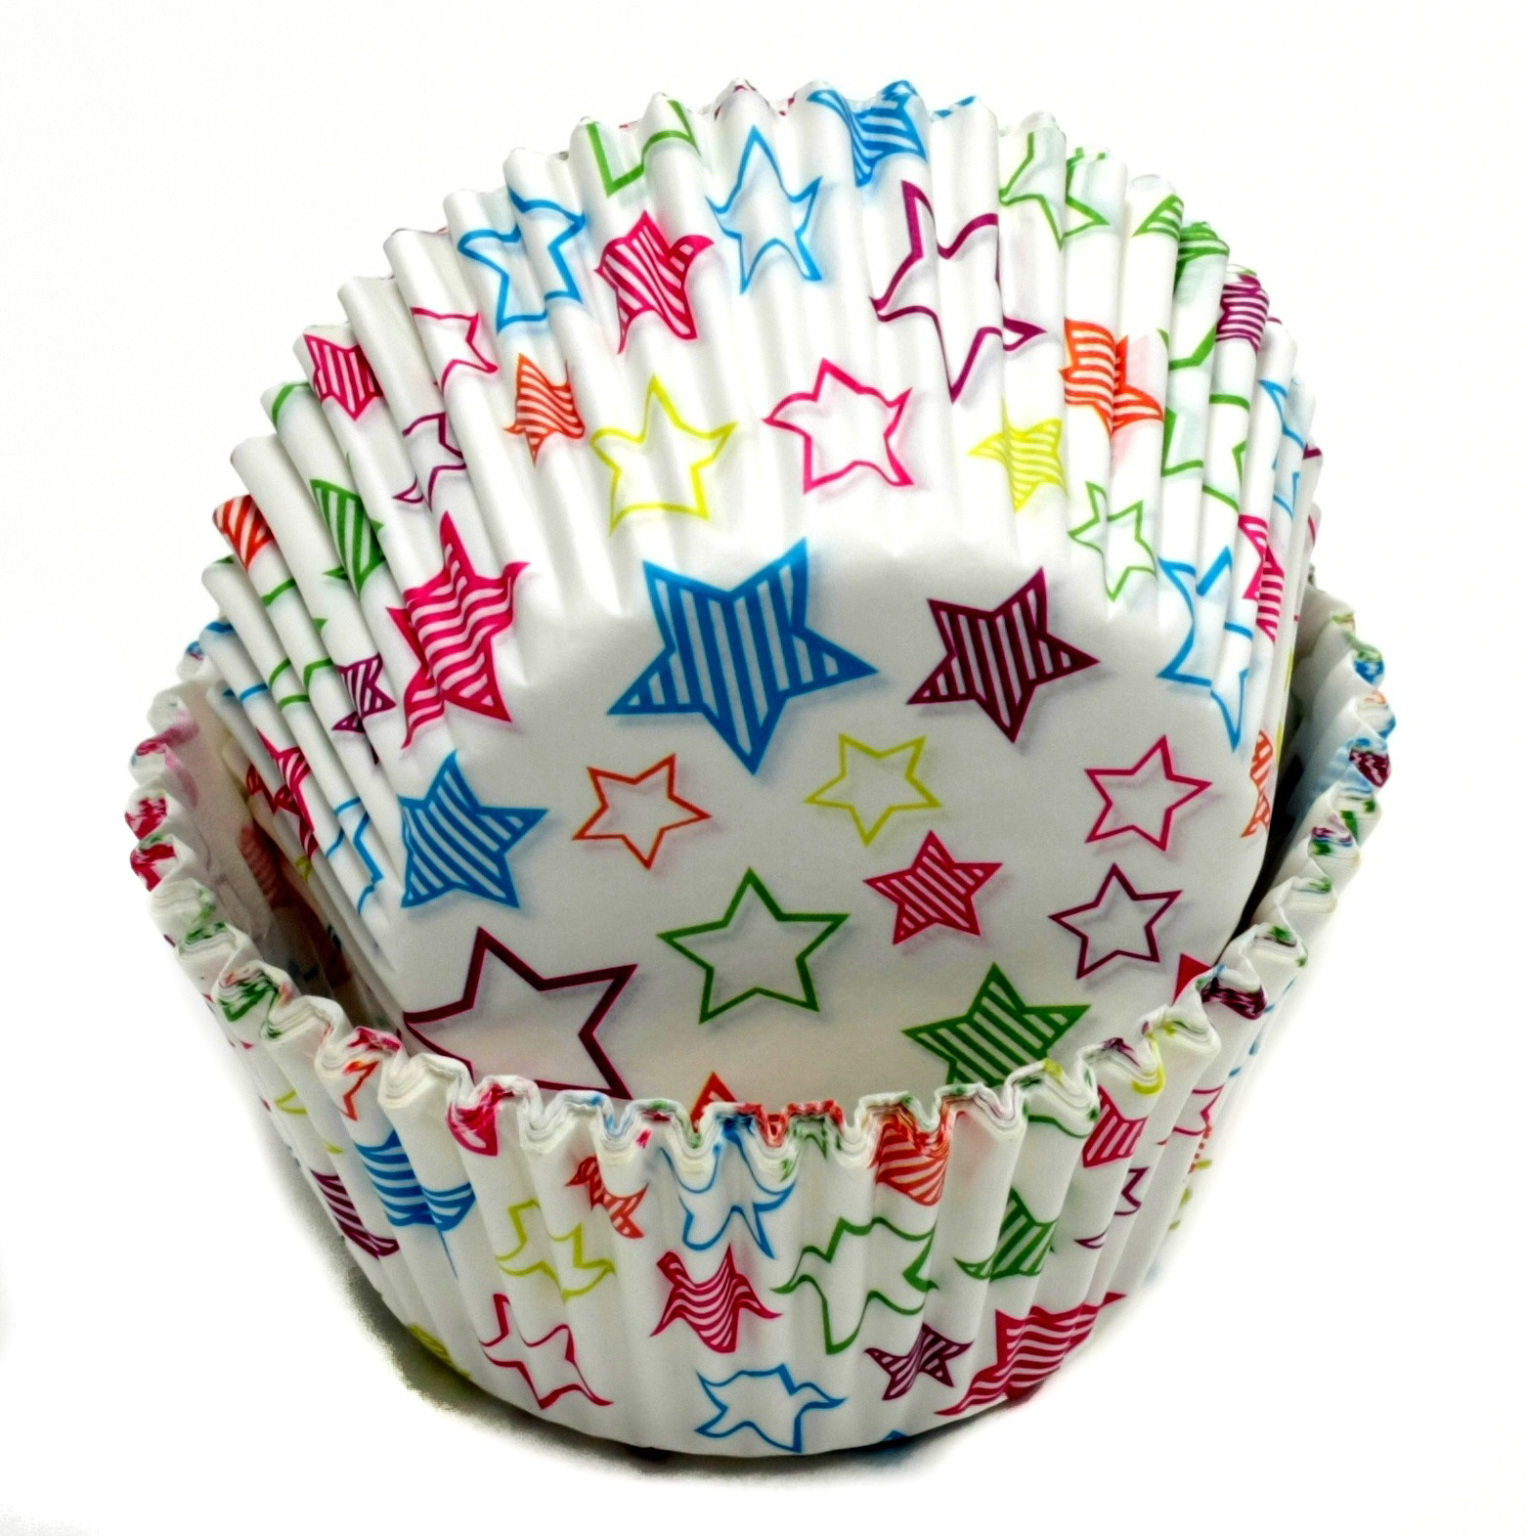 Wholesale Stars Baking Cups - 50 Count(72x.43)